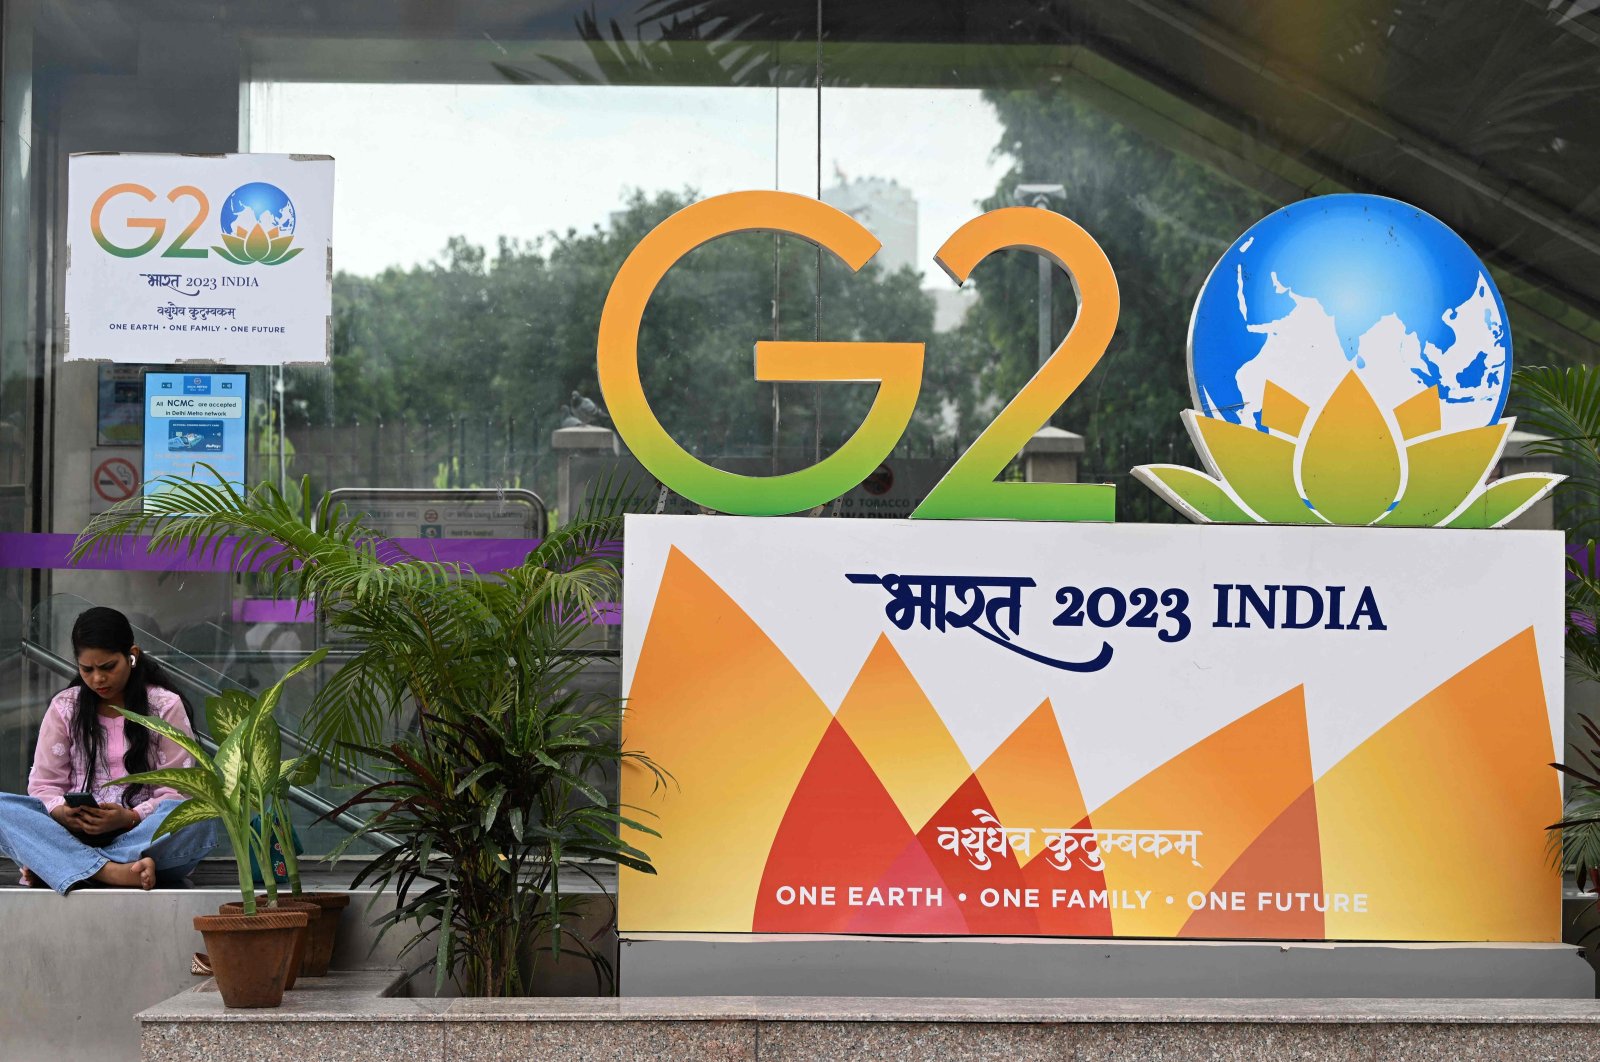 A woman sits near a G-20 summit logo installed along a street in New Delhi, India, Sept. 6, 2023. (AFP Photo)